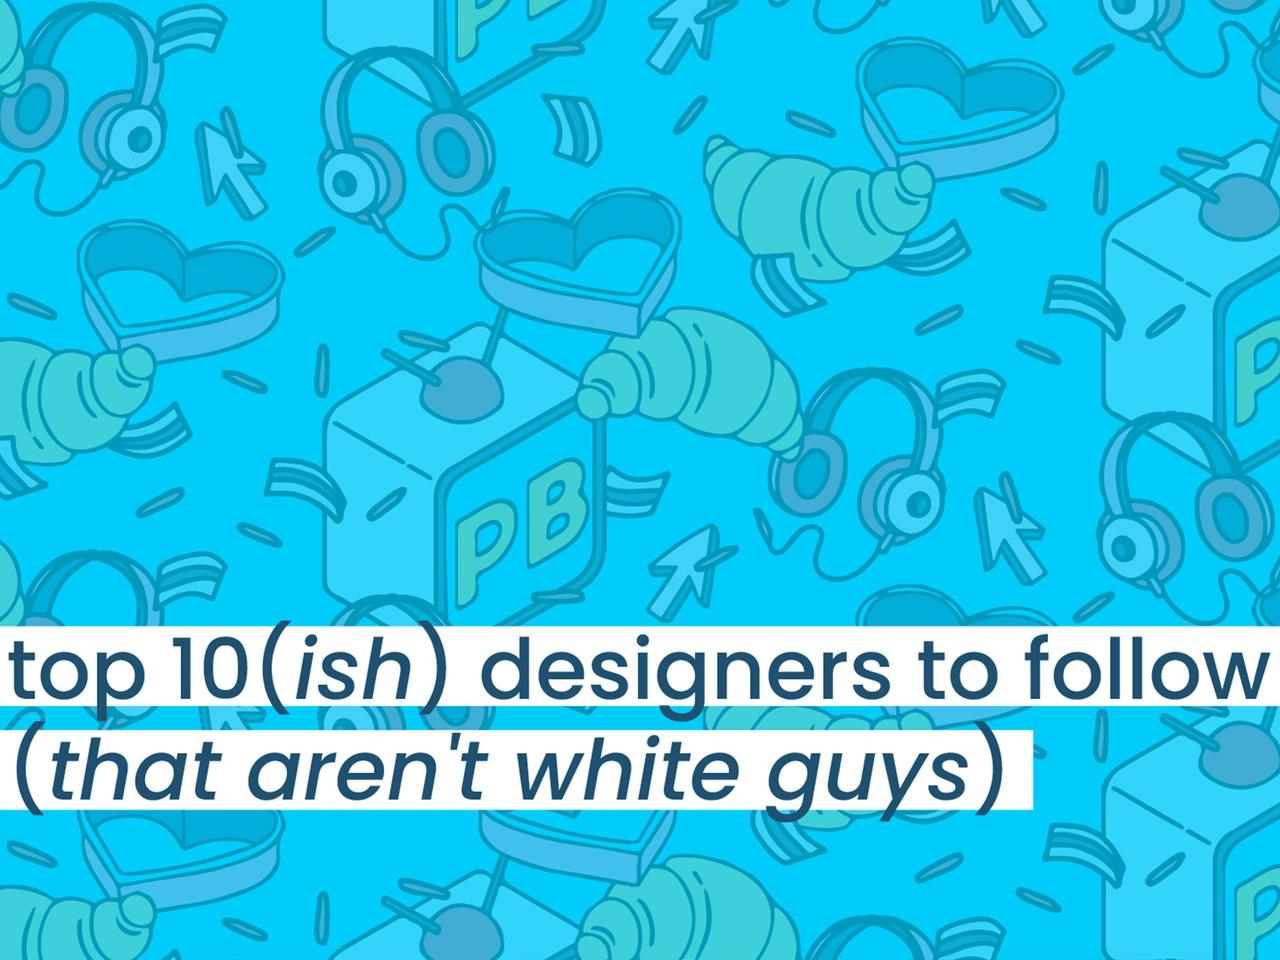 Top 12 Graphic Designers to Follow (That Aren't White Guys), by Lexi Kane